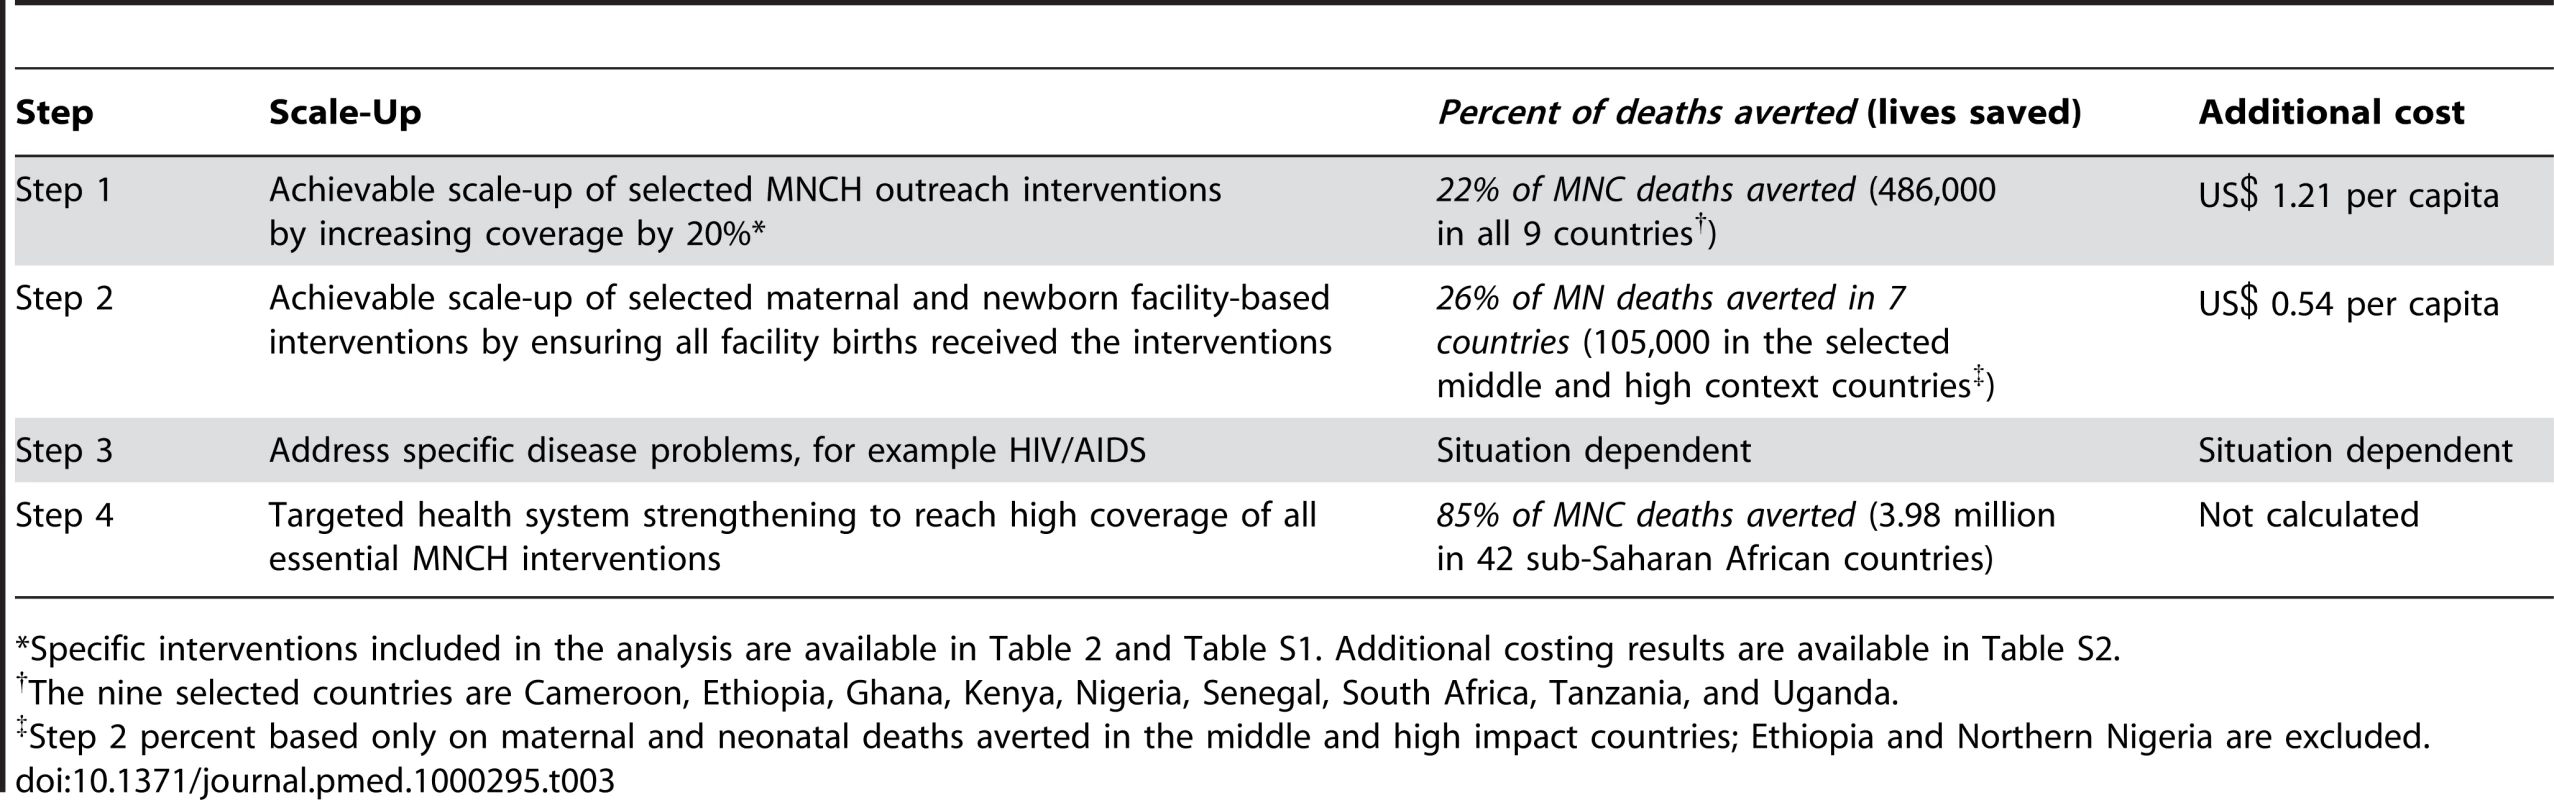 Lives saved and costing results for MNCH in the nine countries.